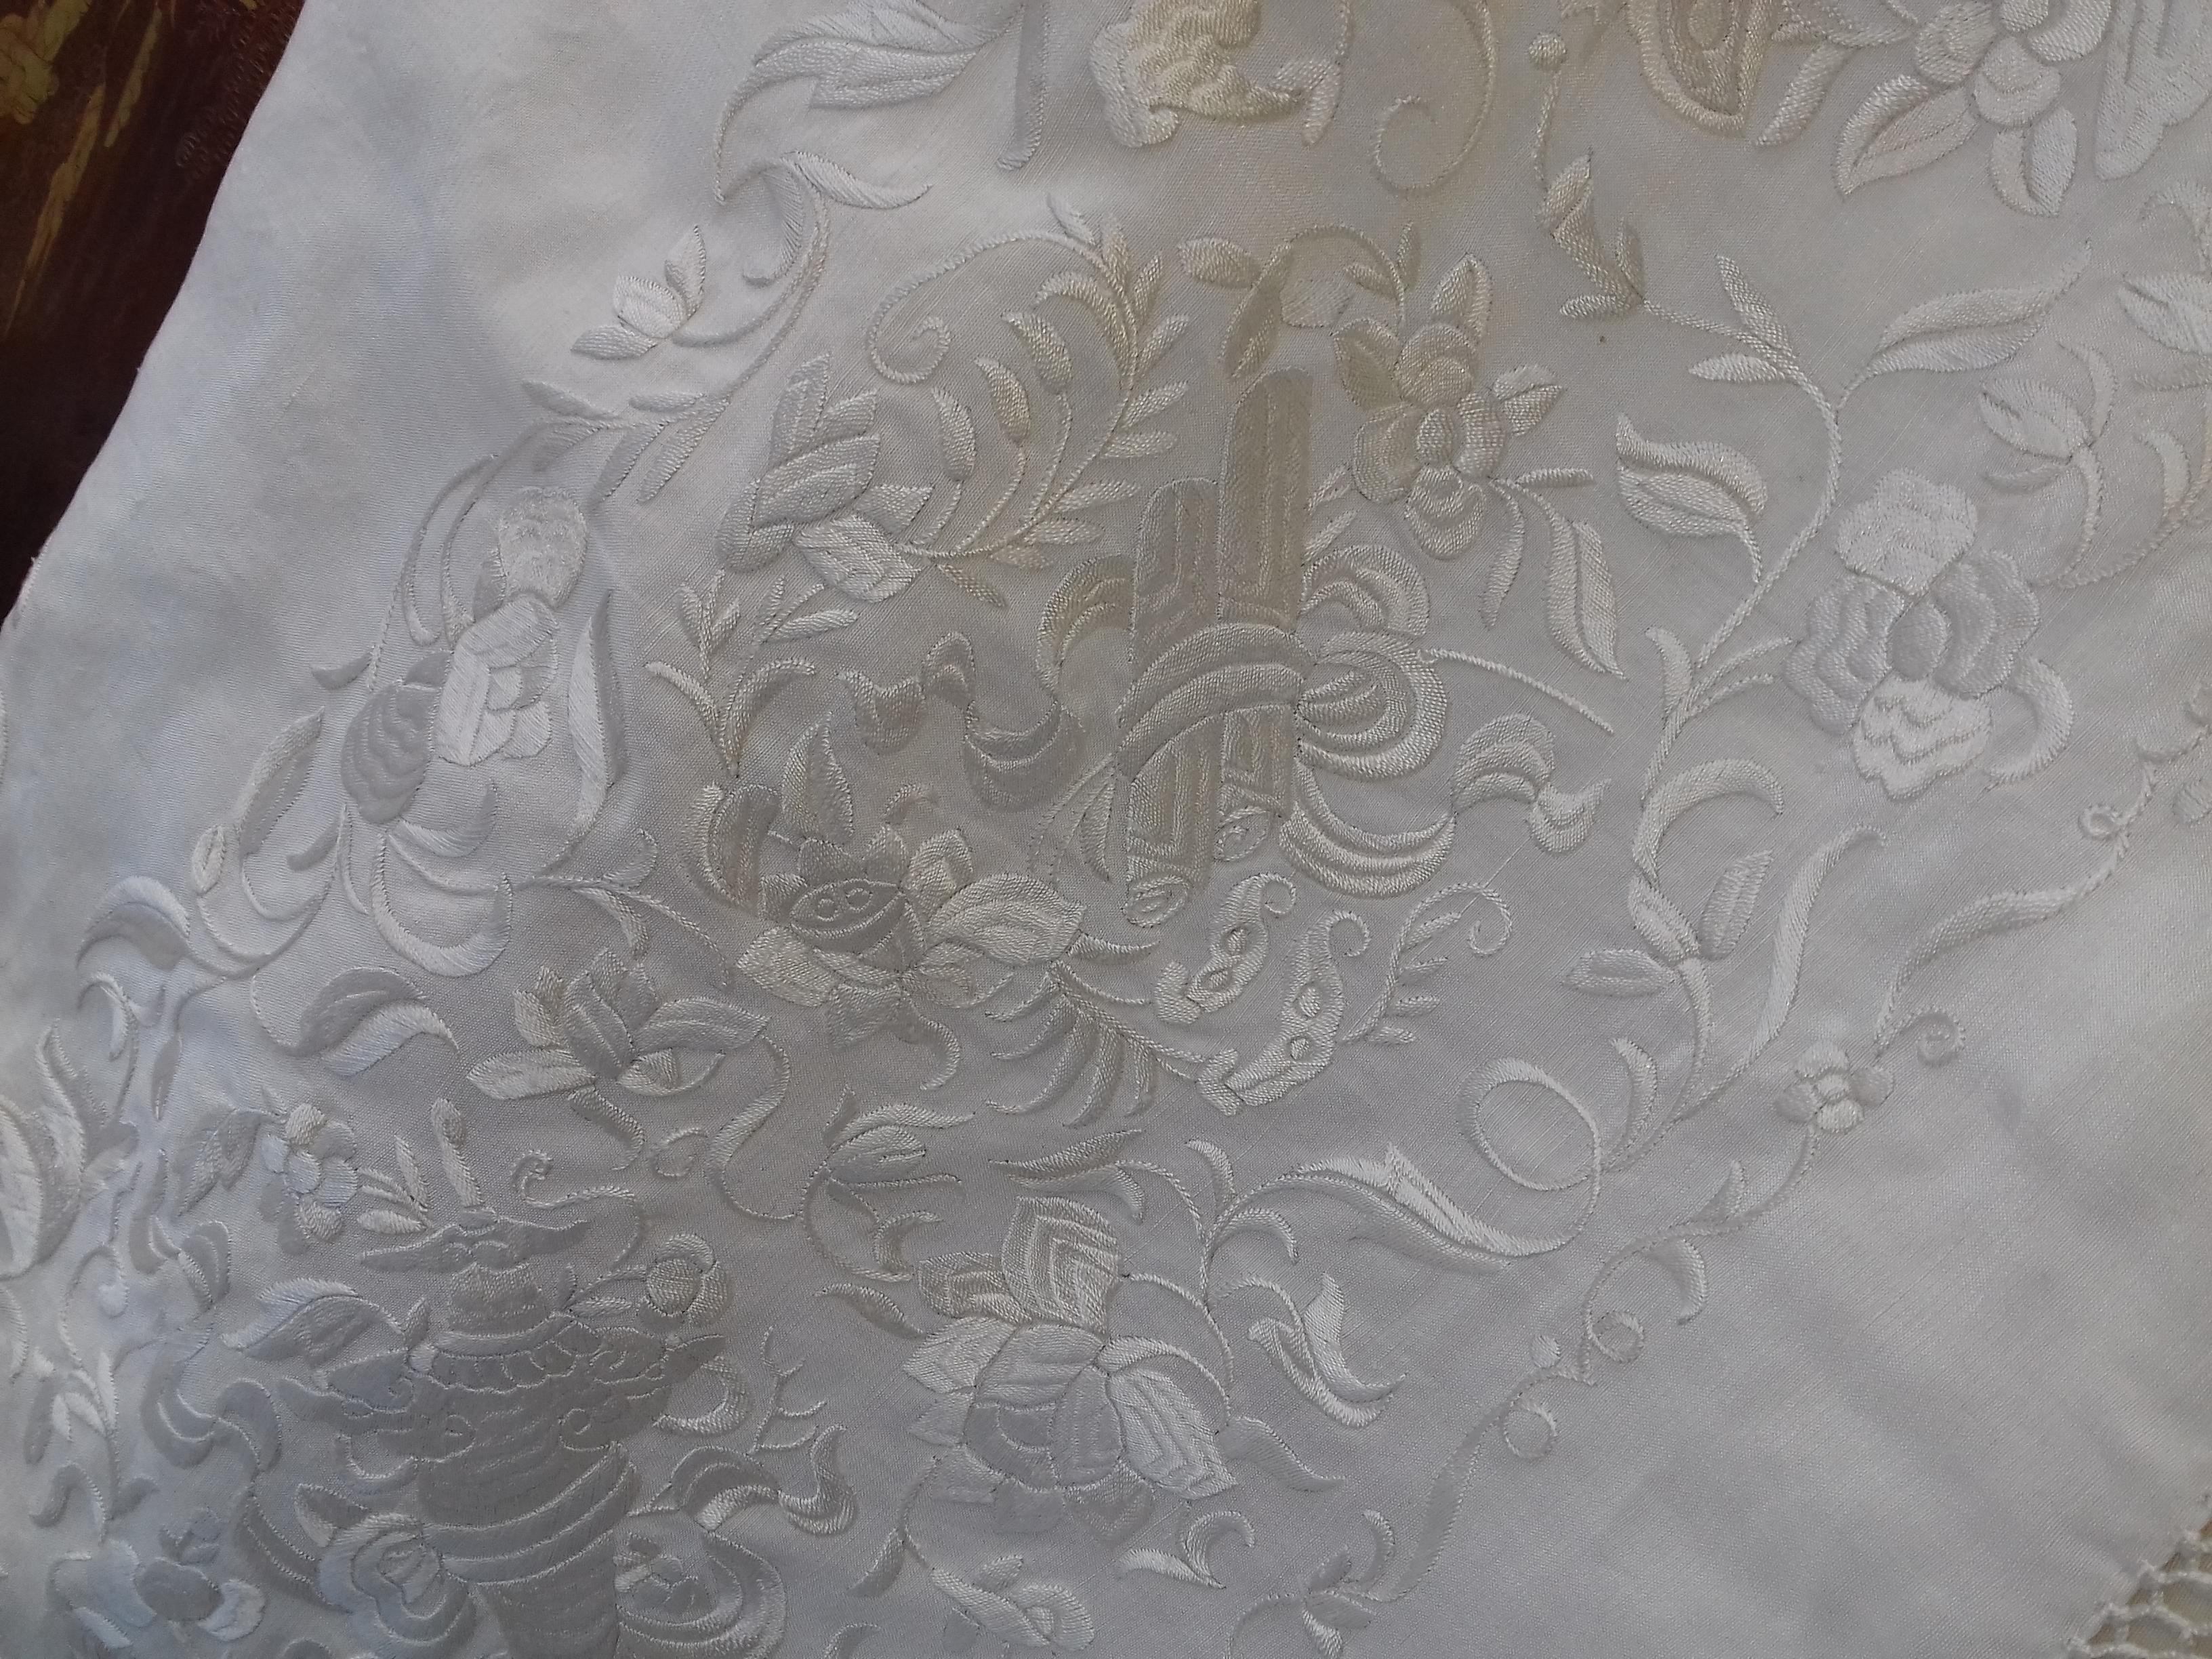 Large Manila Shawl in Embroidered Silk in Chinese Box China late 19 Century For Sale 10